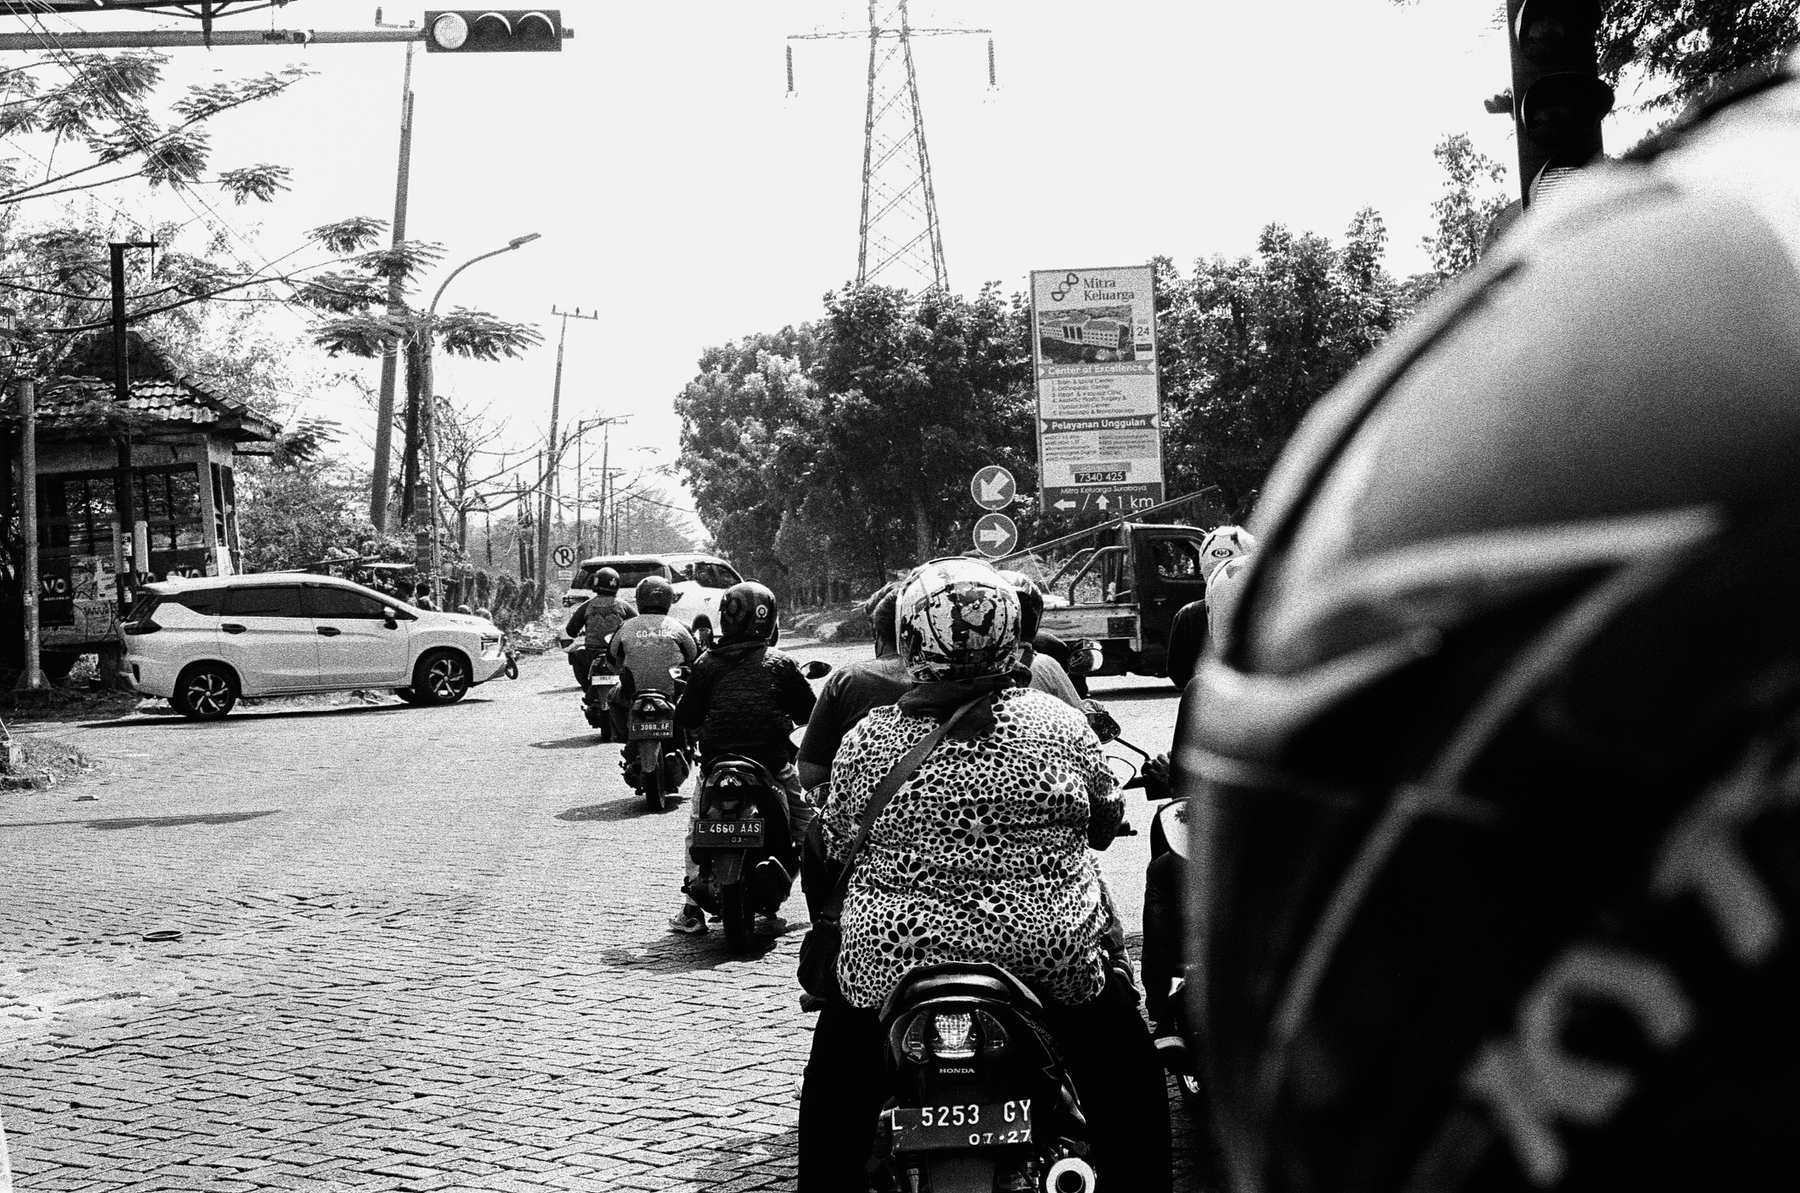 a scan of a black and white photo of traffic in surabaya from the back of a motorbike, pillion. in front, several motorbikes and their passengers stopped at traffic